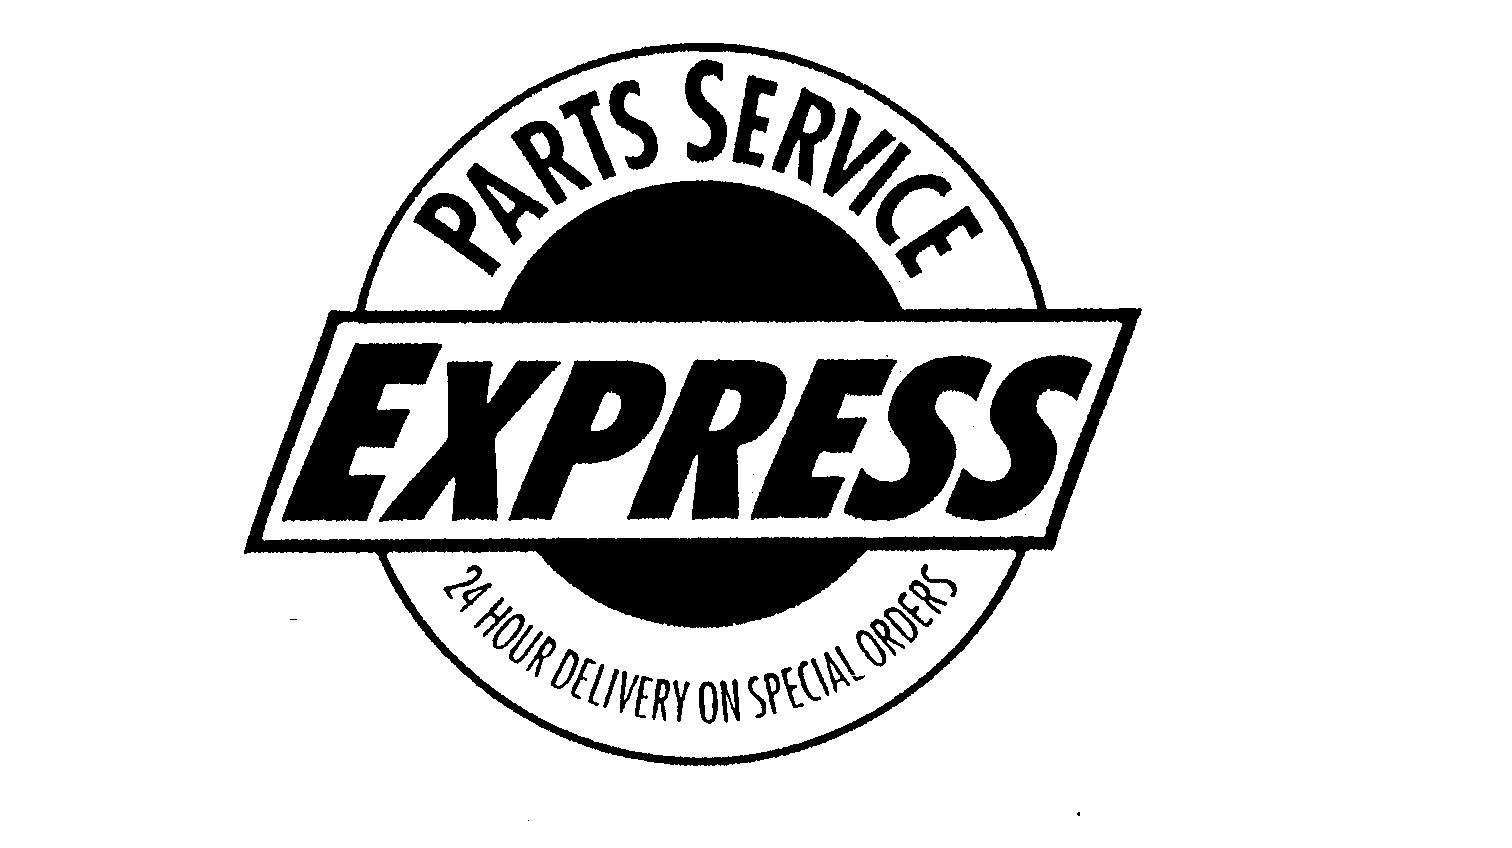  PARTS SERVICE EXPRESS 24 HOUR DELIVERY ON SPECIAL ORDERS